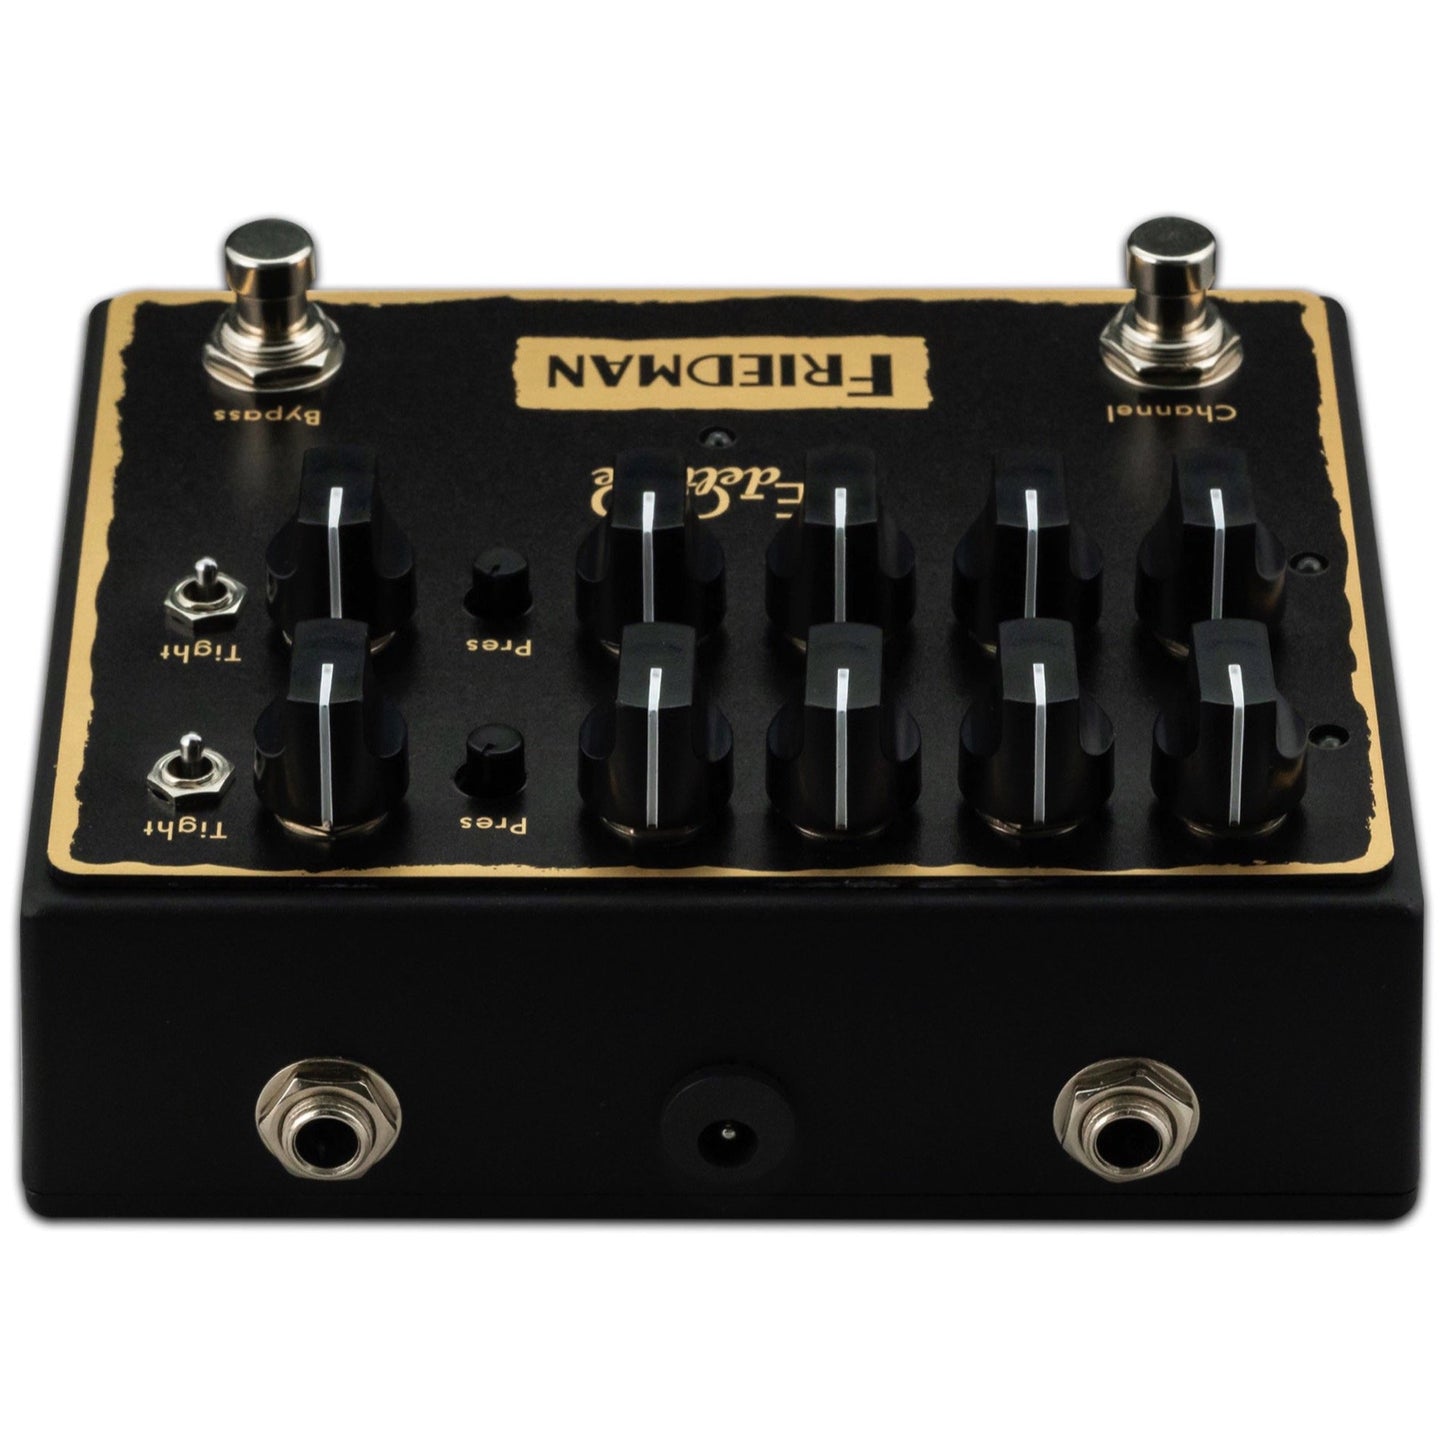 Friedman BE-OD Deluxe Dual Overdrive Pedal